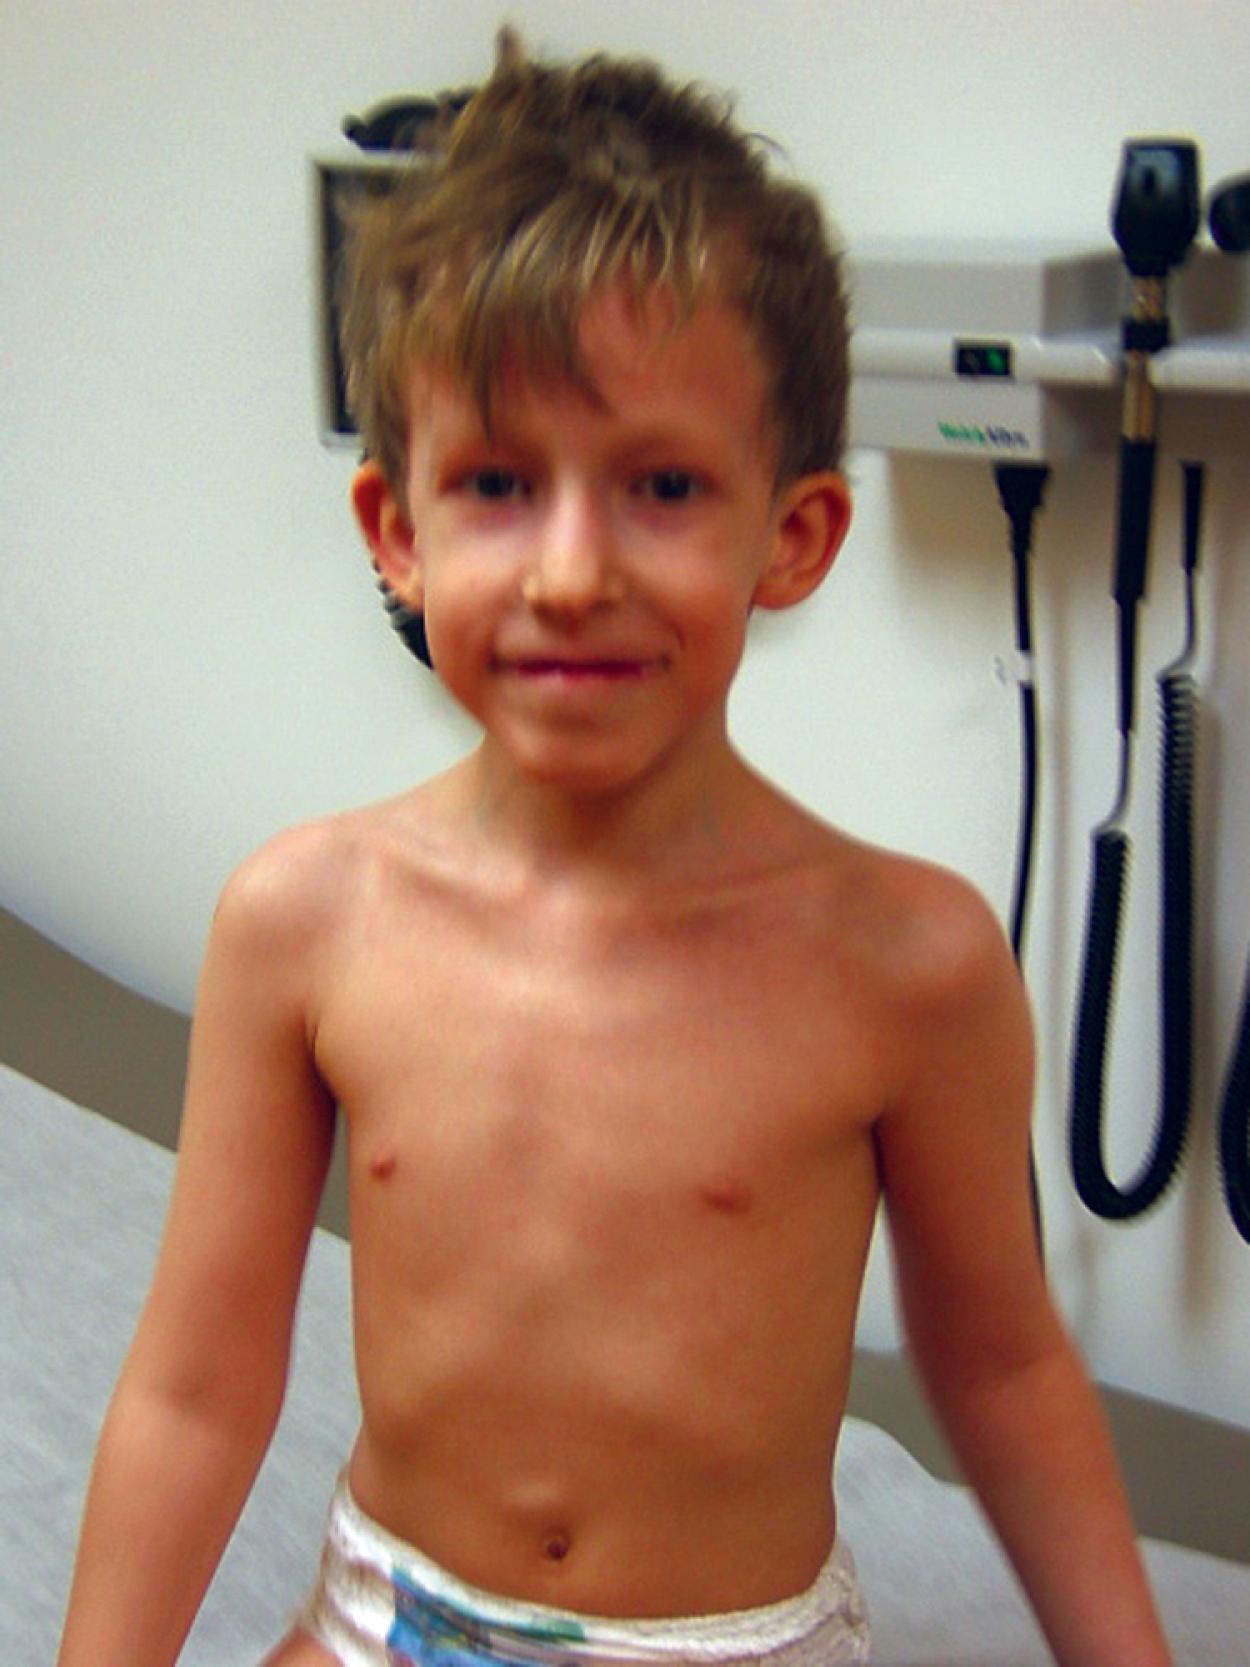 Fig. 1.22, An 8-year-old with del22q.11 and 1p31.1 microdeletion. Patient is short in stature; has a right aortic arch, sacral dimple, left cryptorchidism, and global developmental and significant cognitive and speech delays; and is not toilet trained. He had undergone surgical repair of the palate for velopharyngeal incompetence. Note the low-set, cupped, and posteriorly rotated ears and hypoplastic alae nasi. DiGeorge syndrome was diagnosed in utero by prenatal FISH on amniocytes: 46, XY, ish del(22) (q11.2q11.2) (TUPLE1–) was confirmed at 6 years of age by oligonucleotide arrays. In addition, 1p31.1 microdeletion was detected and maternally inherited.